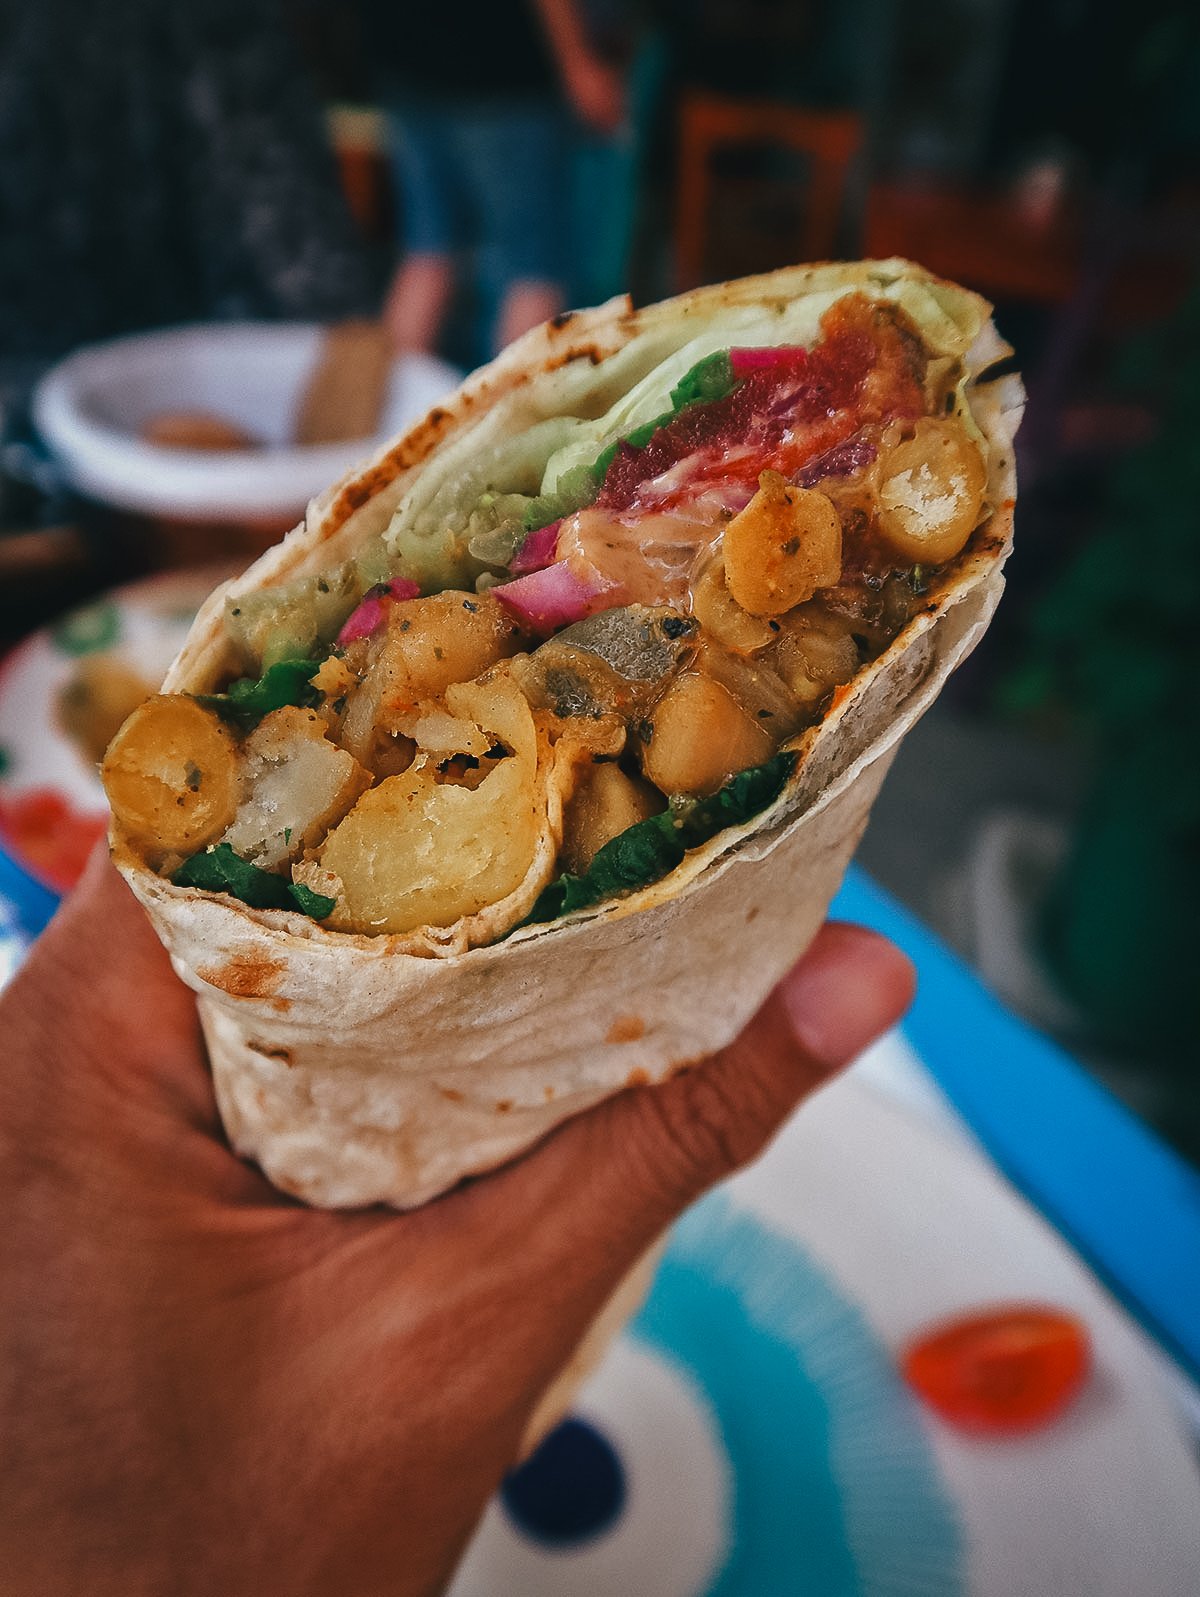 Chickpea wrap at a healthy restaurant in Istanbul